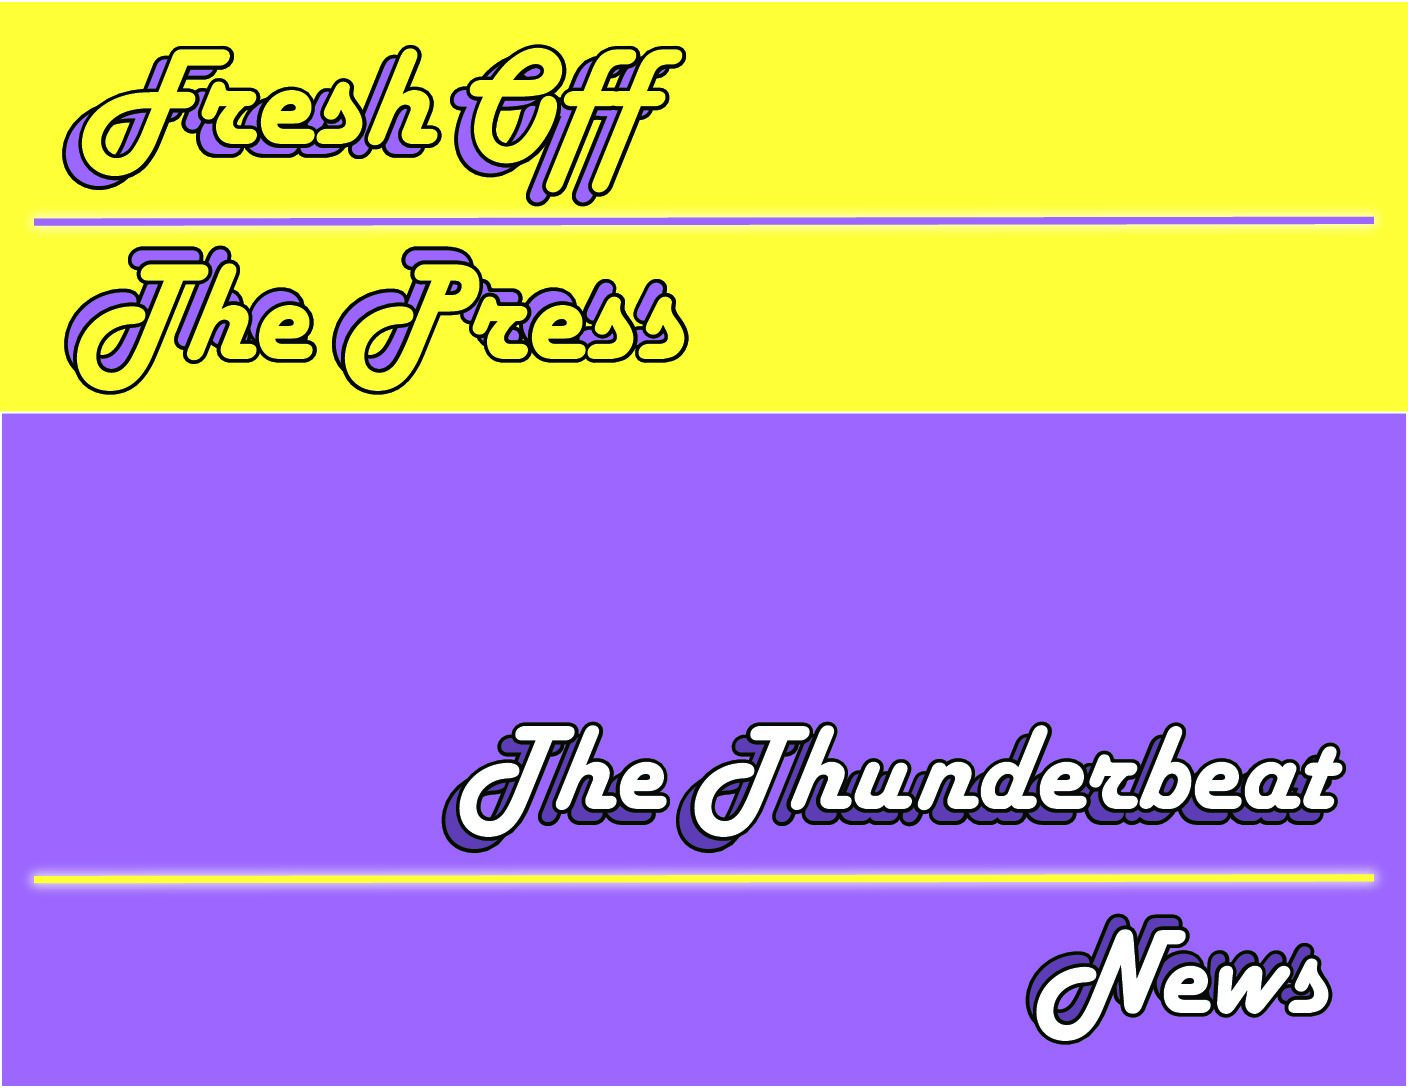 The weekly news presented by The Thunderbeat with Trevor Slachetka